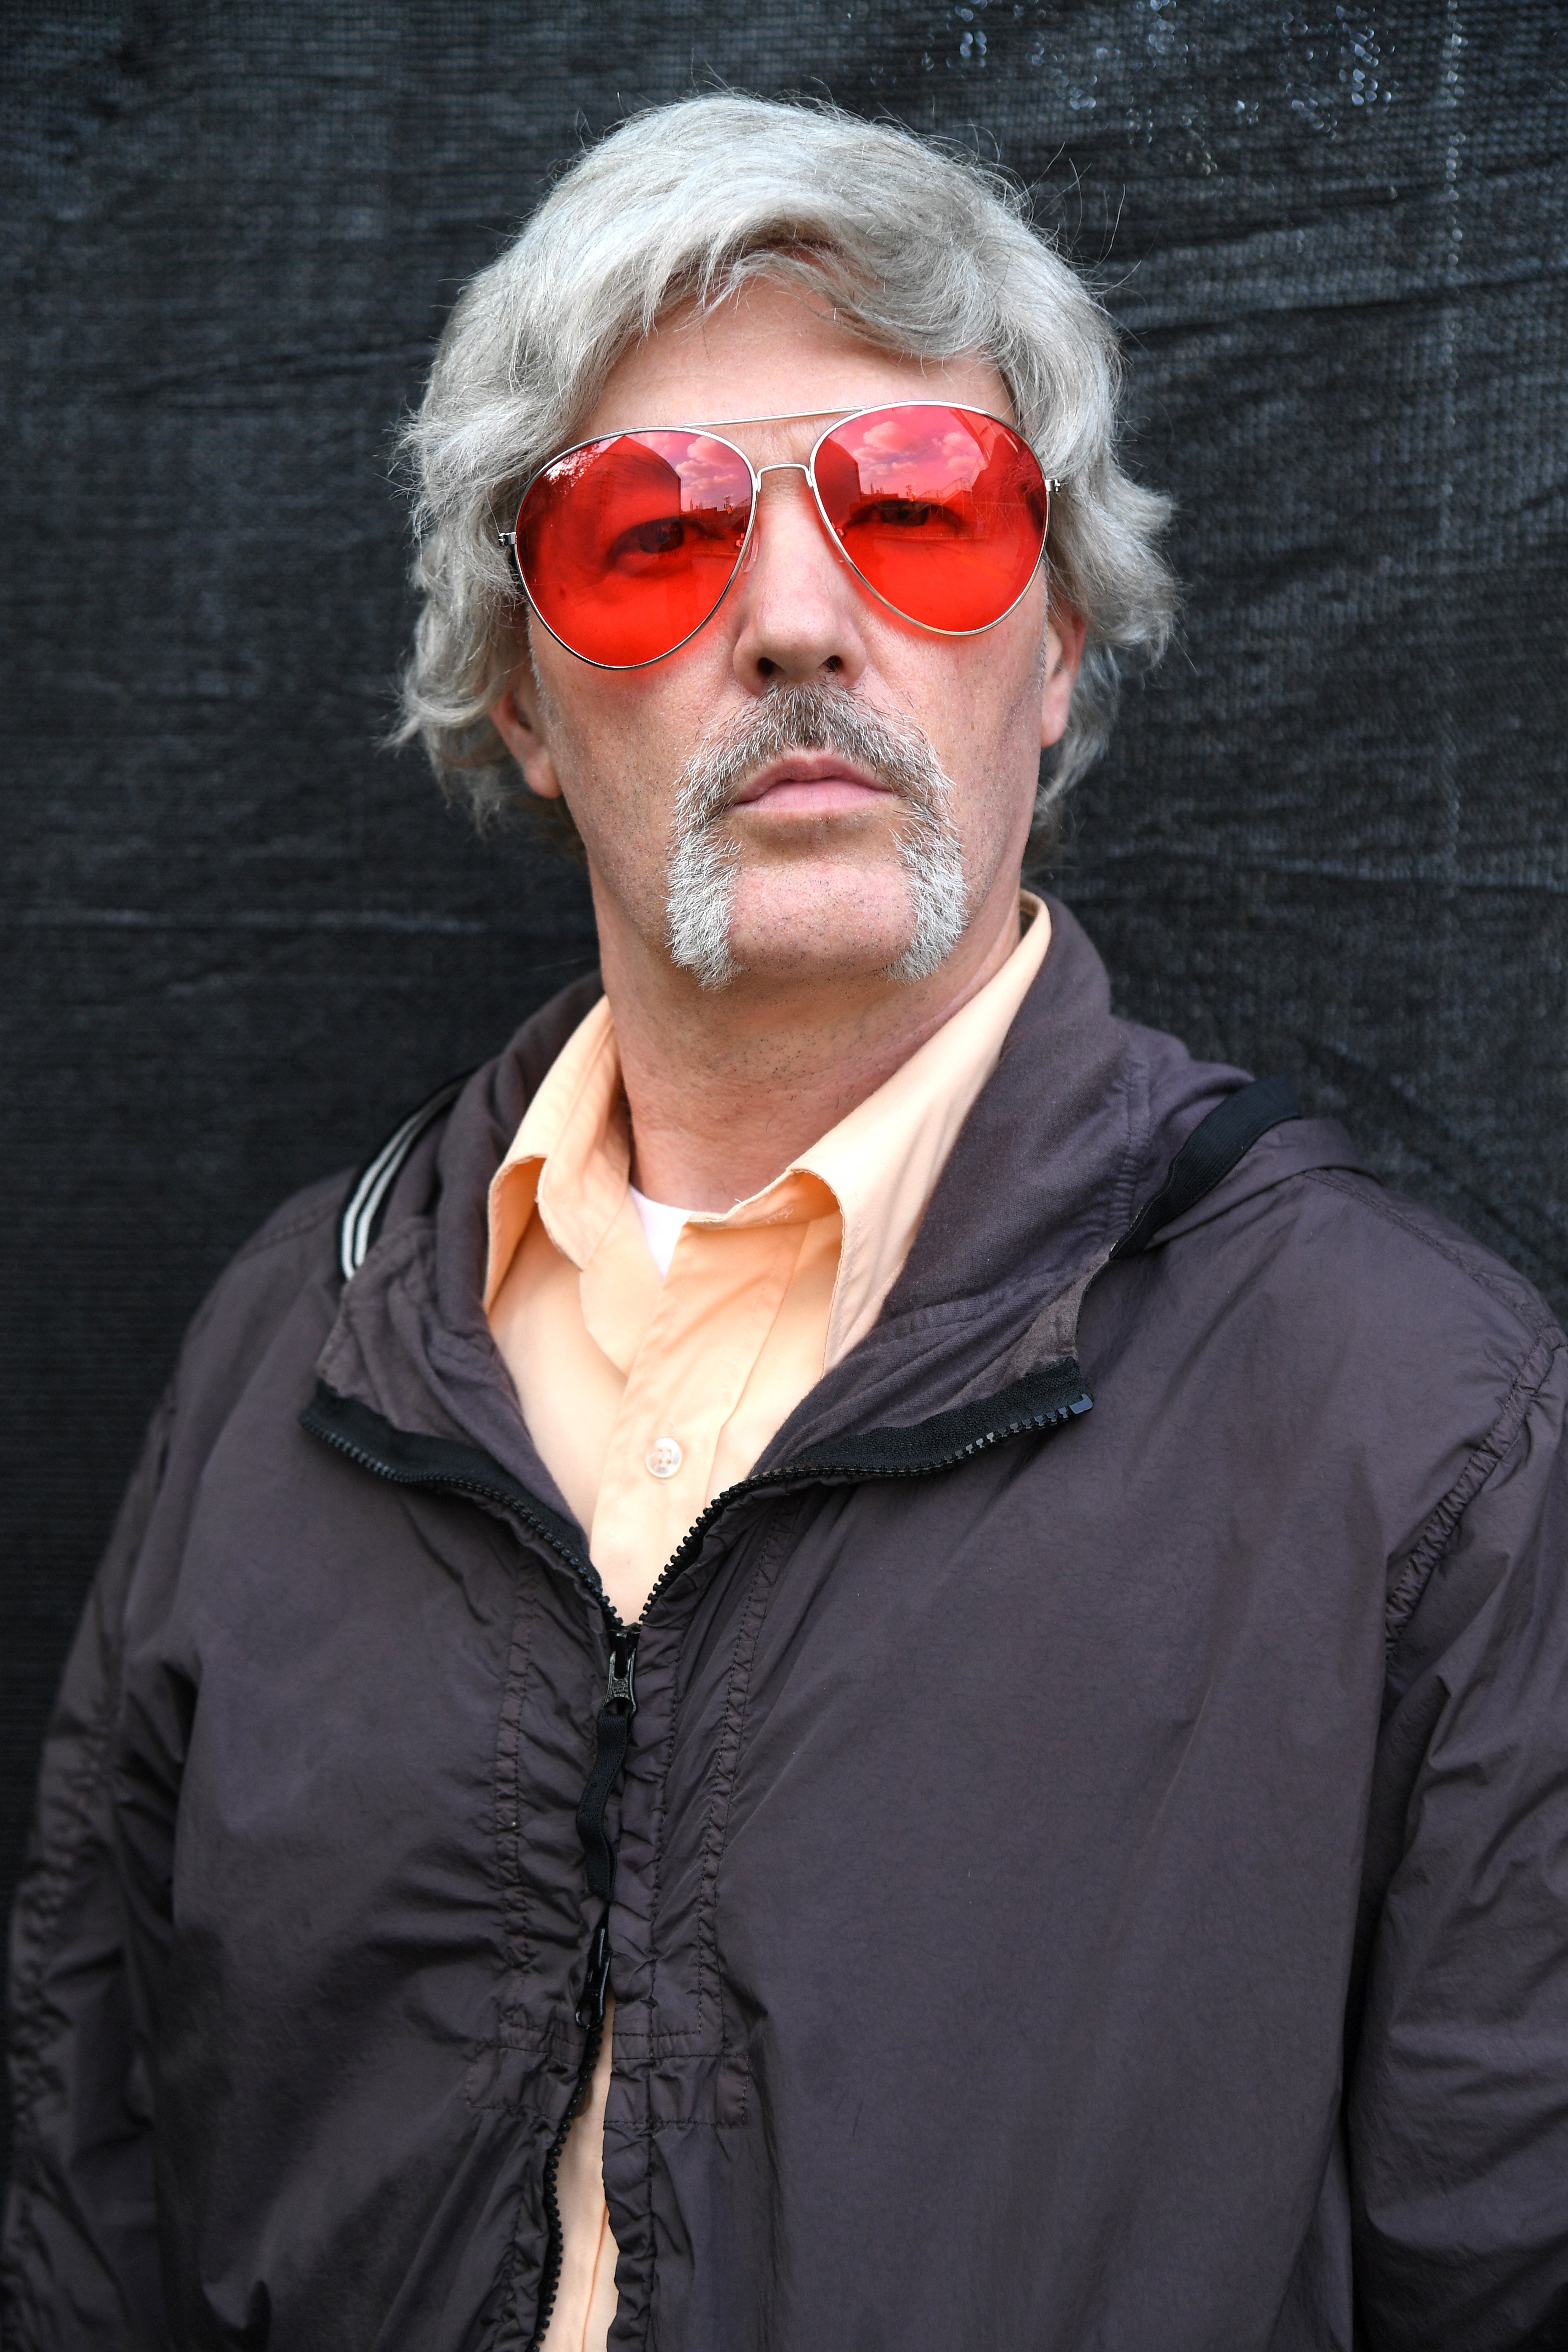 Man with heart-shaped sunglasses and a mustache, wearing a jacket over a collared shirt